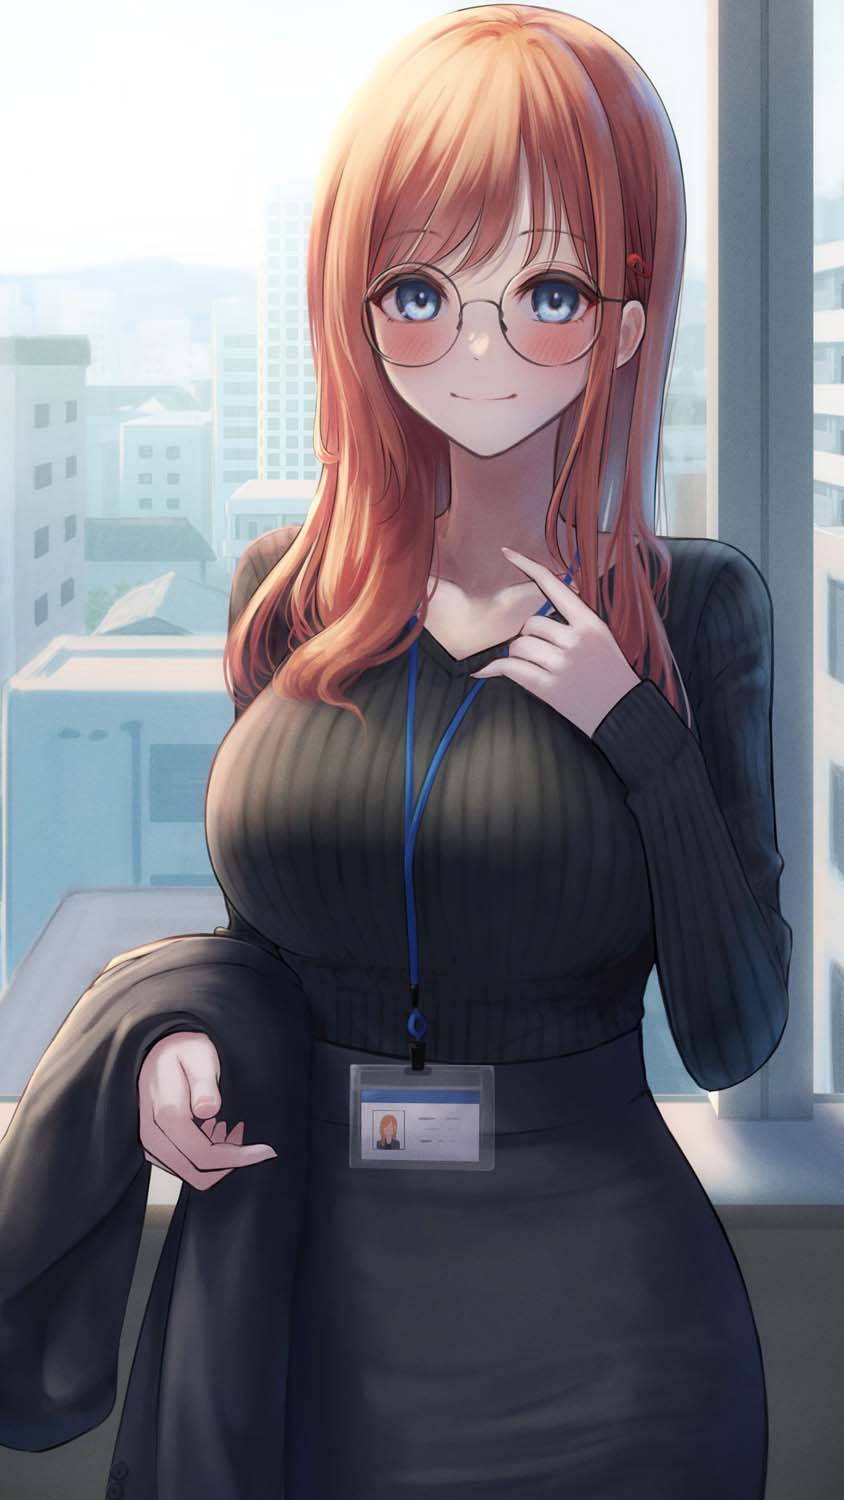 Anime Office Girl IPhone Wallpaper - IPhone Wallpapers : iPhone Wallpapers